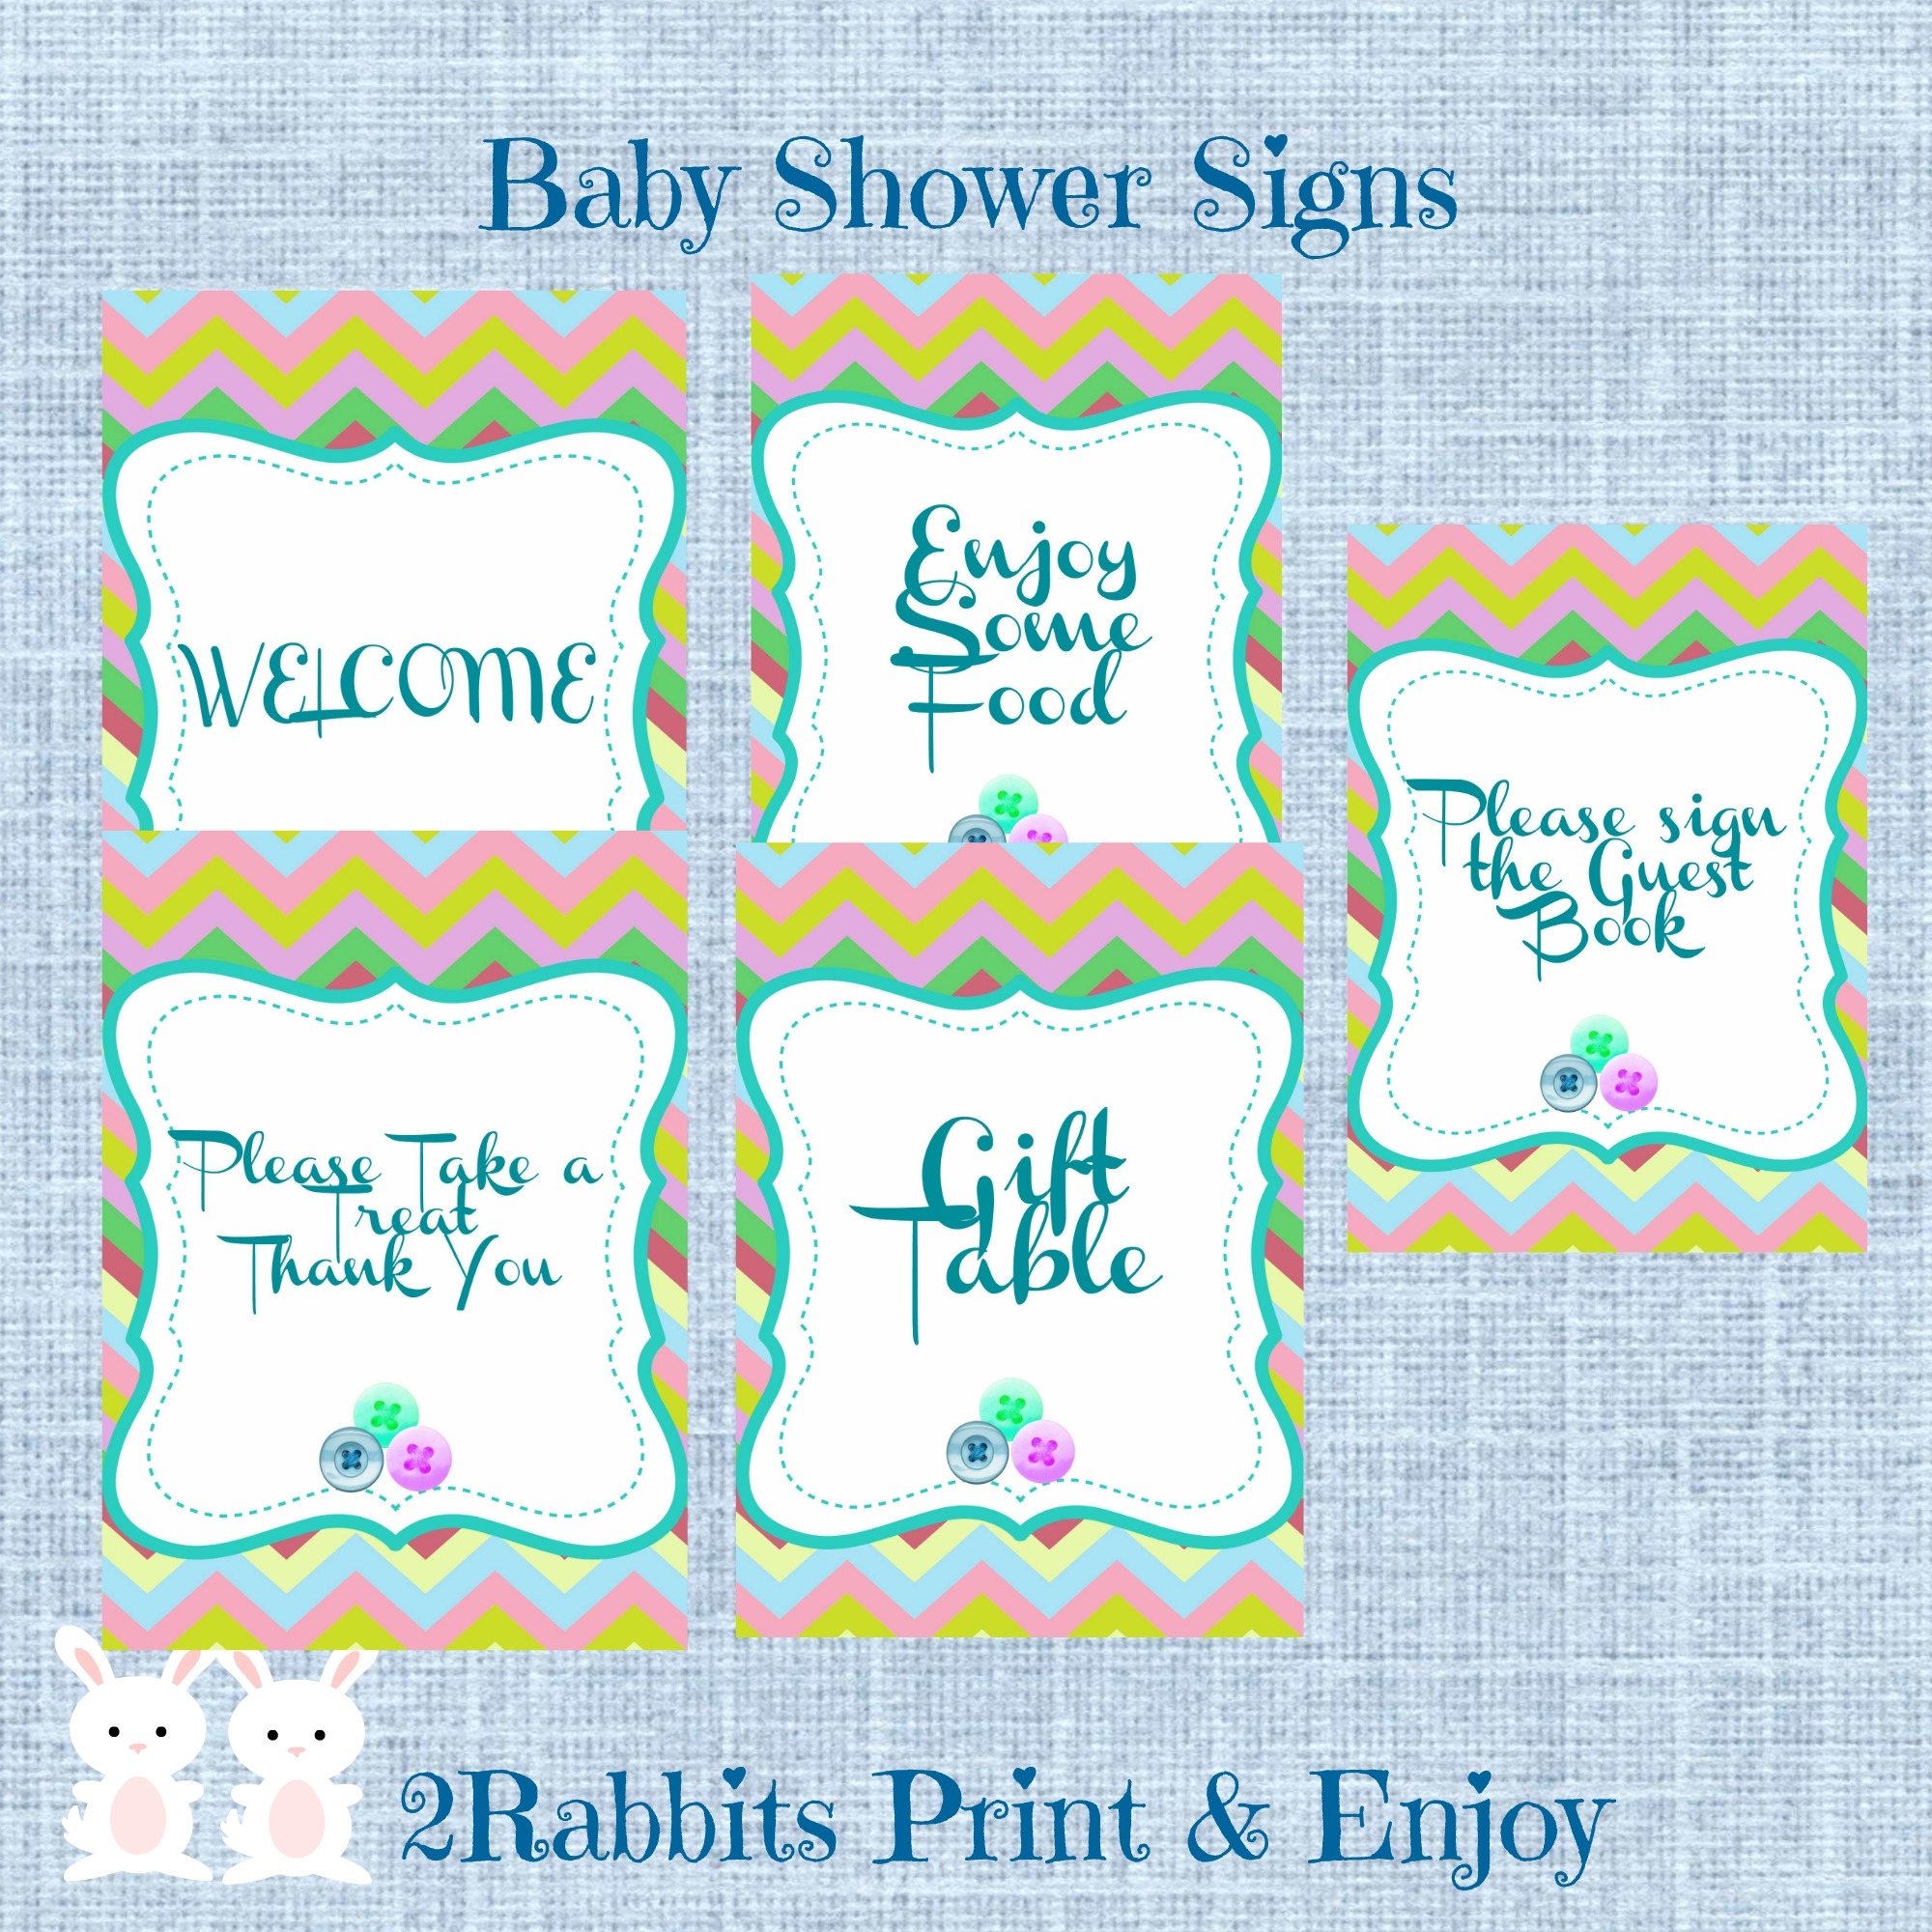 Cute As A Button Baby Shower Inspiration Board My Practical Baby Shower Guide - Free Printable Baby Shower Table Signs